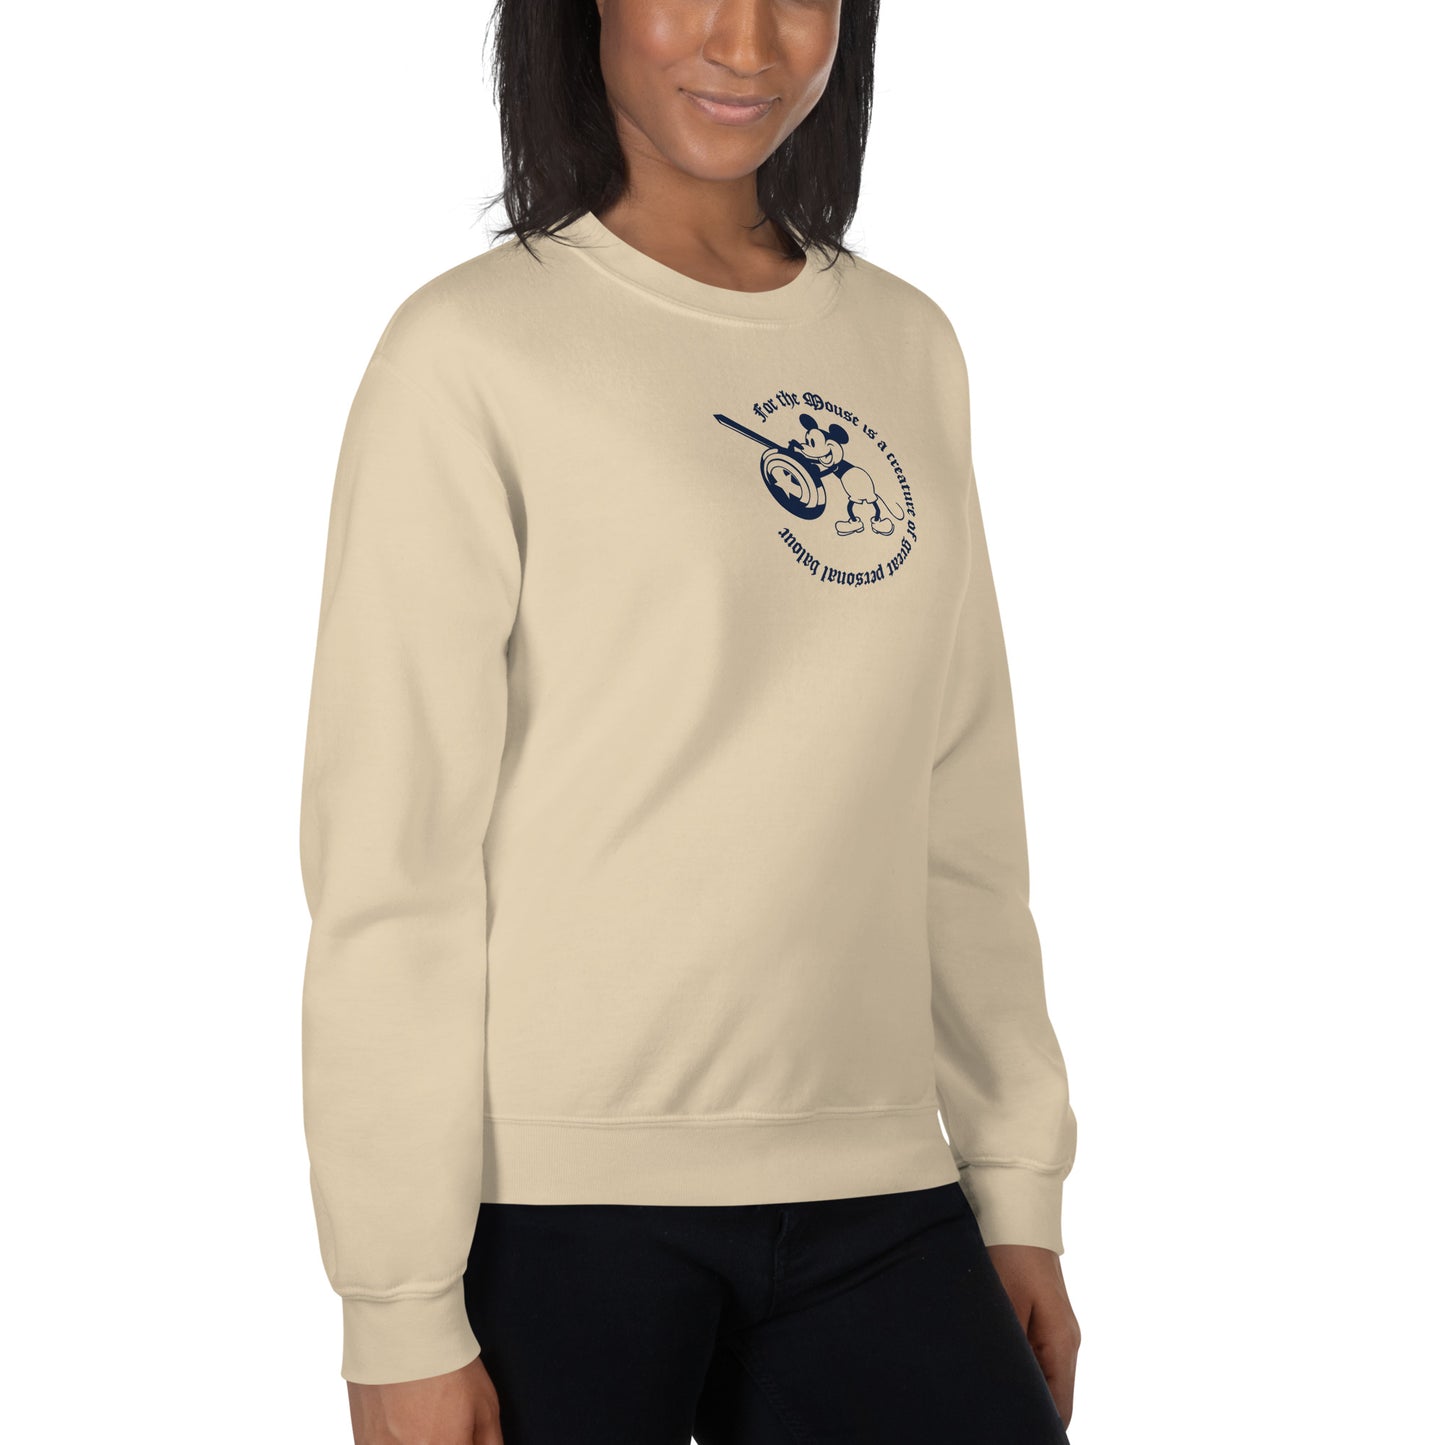 For the Mouse - Unisex Sweatshirt